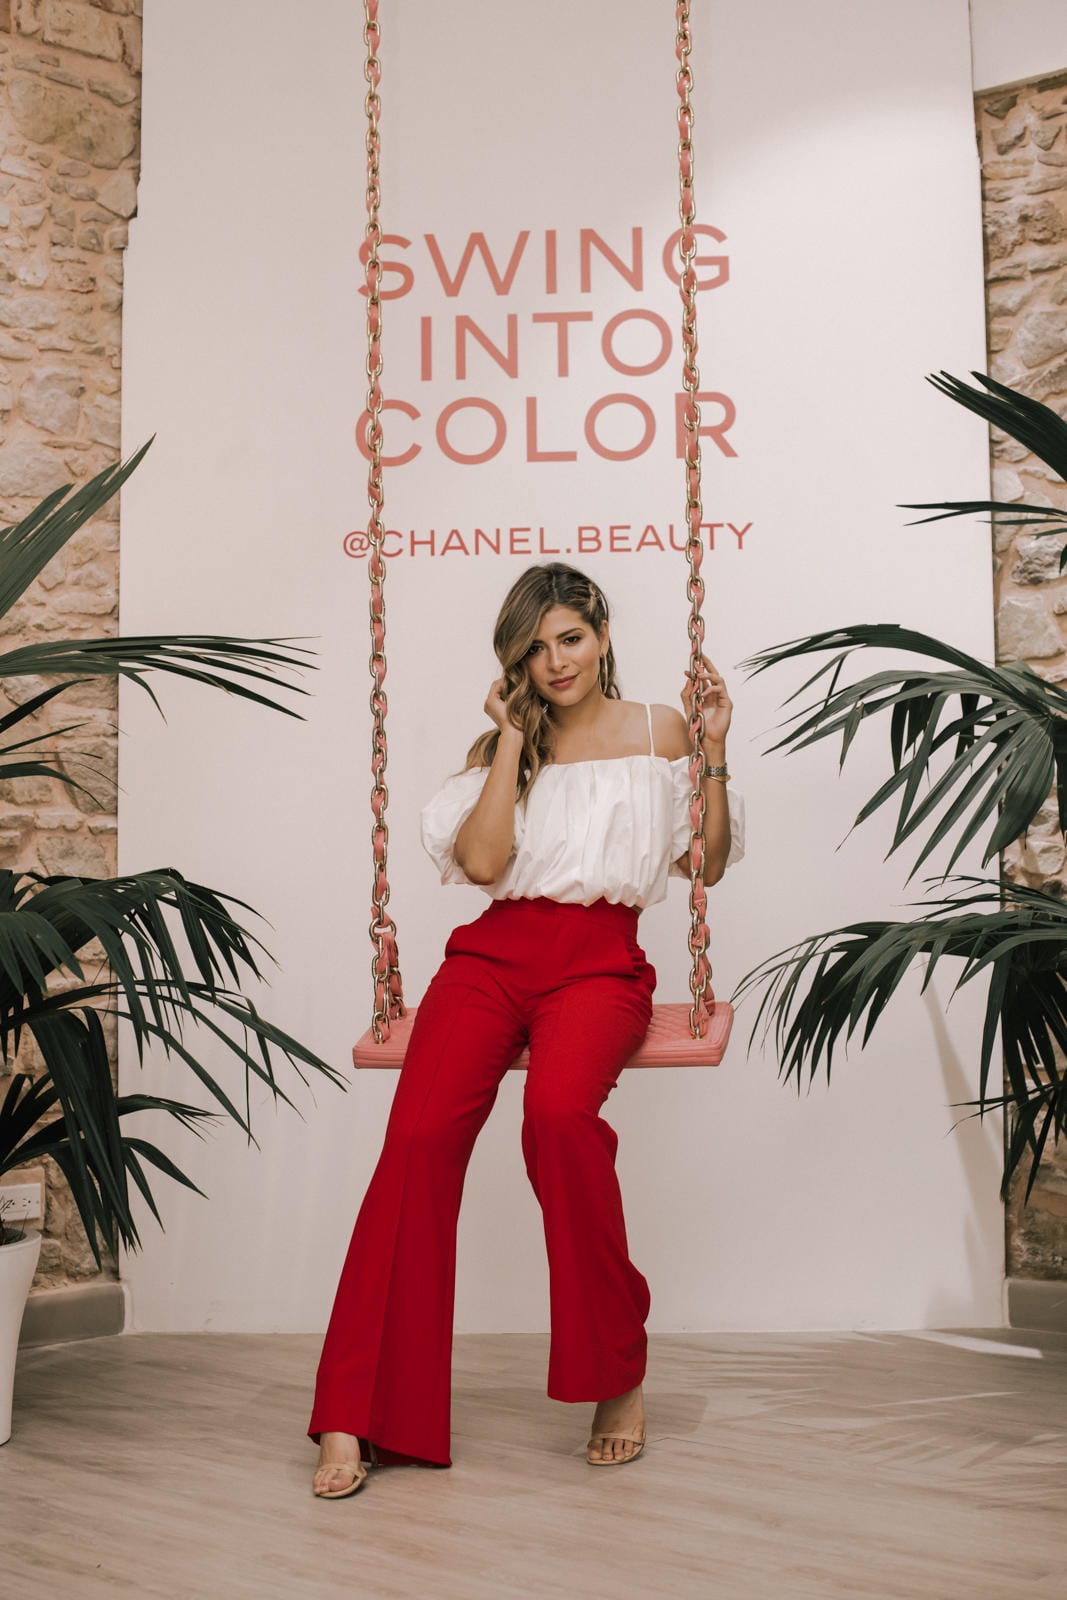 White Off the Shoulder Top, Red Trousers, Wide Leg Pants, Chic Summer Outfit, Pam Hetlinger Style | TheGirlFromPanama.com